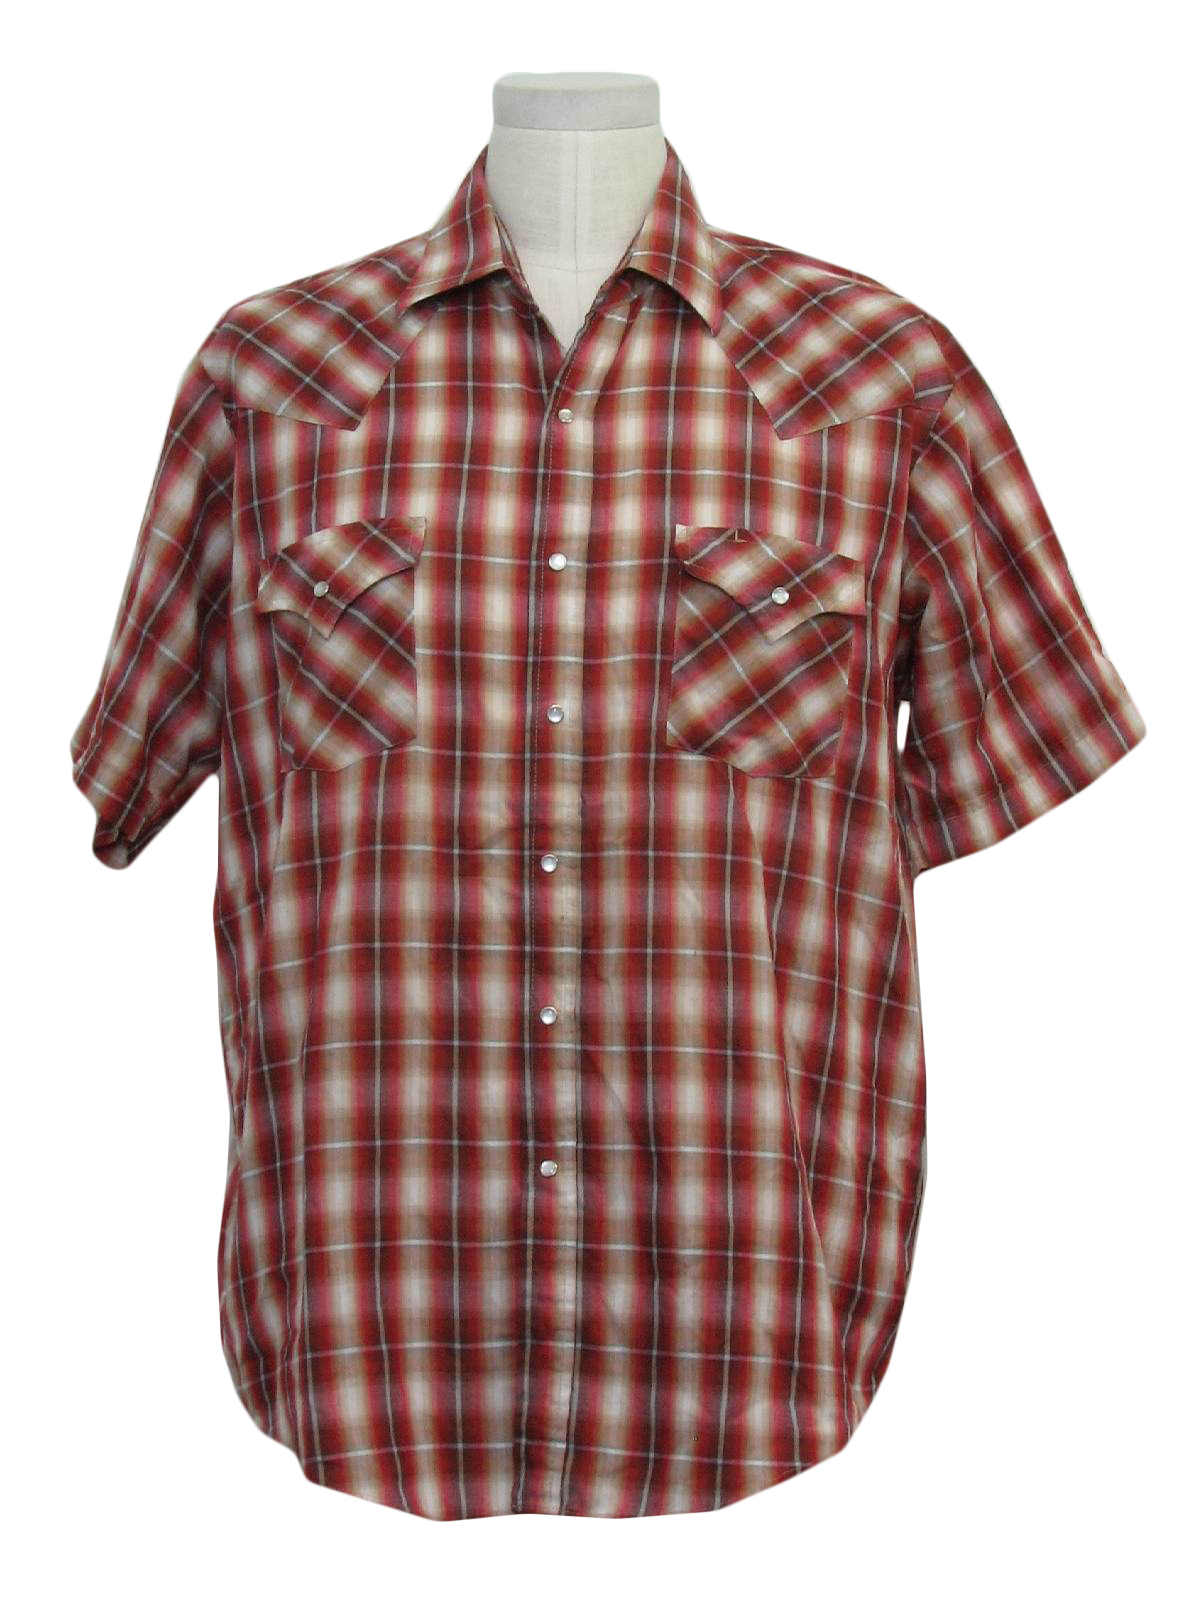 Retro 1980s Western Shirt: 80s -Plains- Mens red, white, tan and blue ...